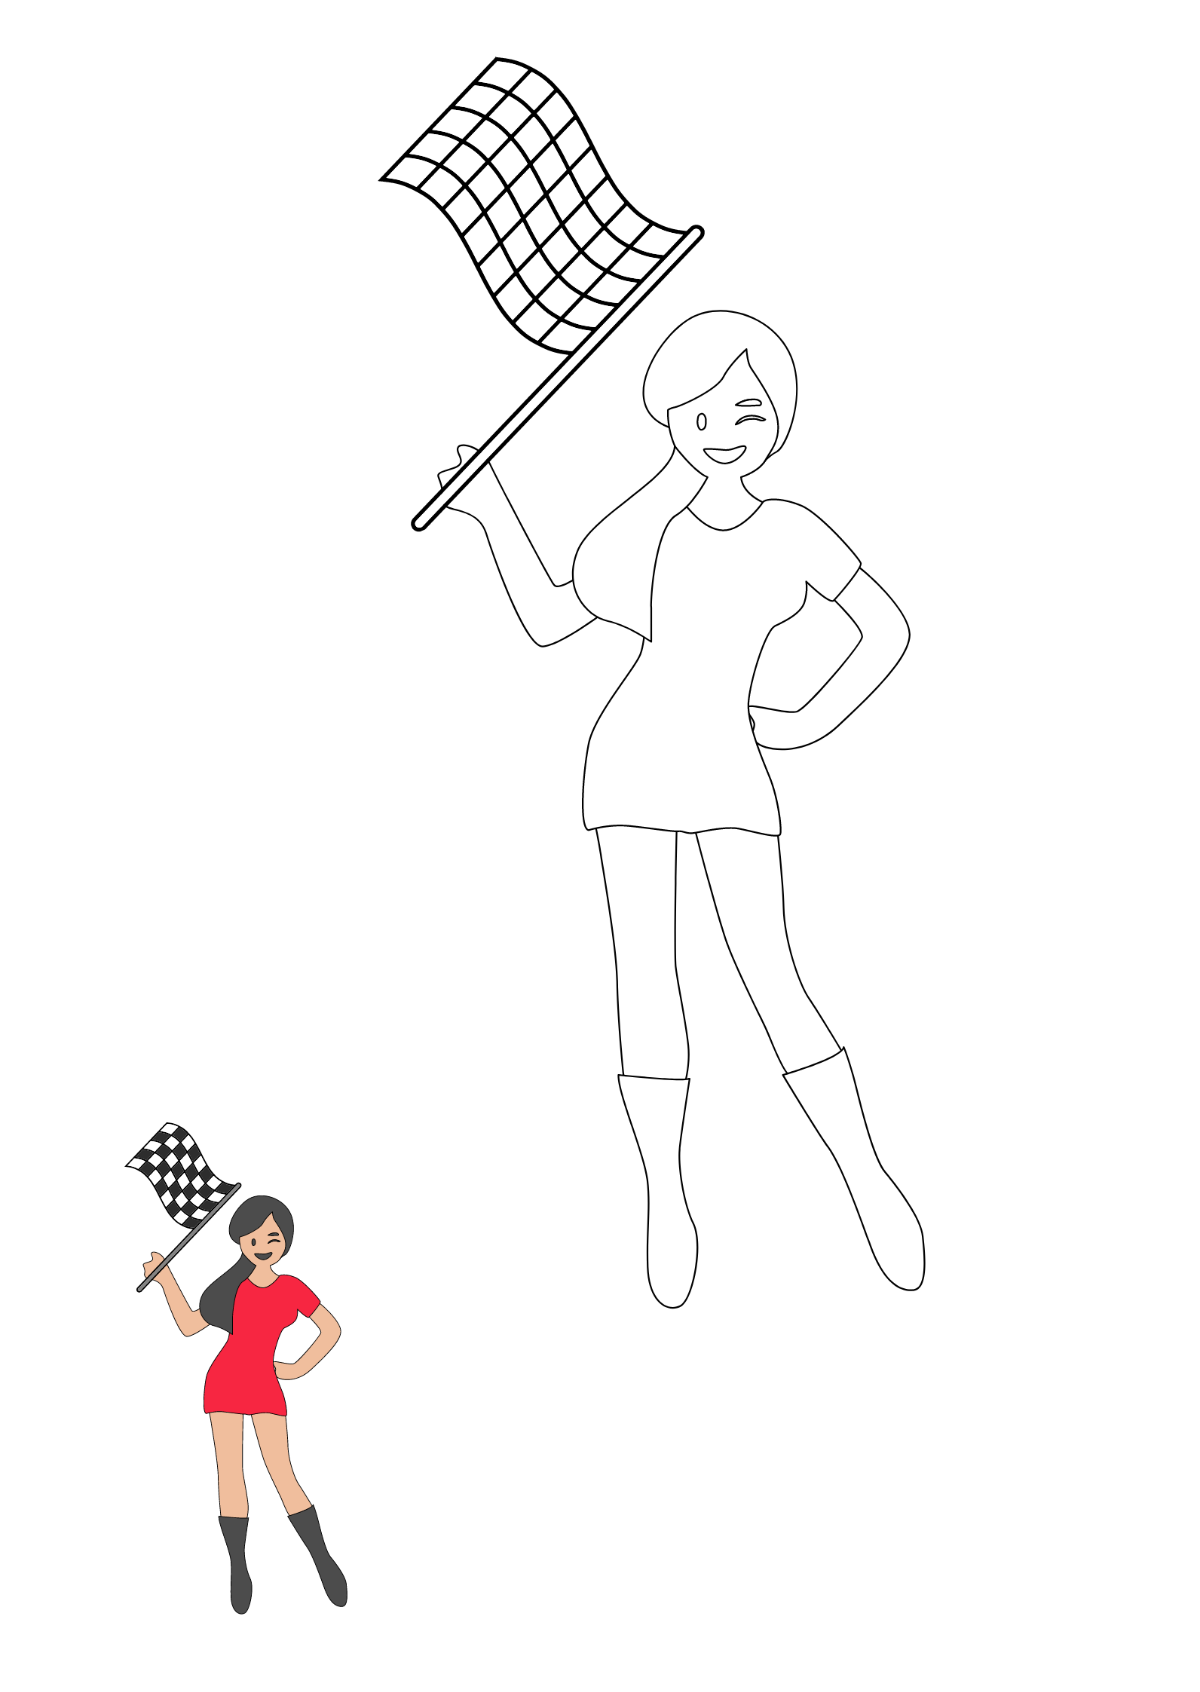 Checkered Flag Girl coloring page Template